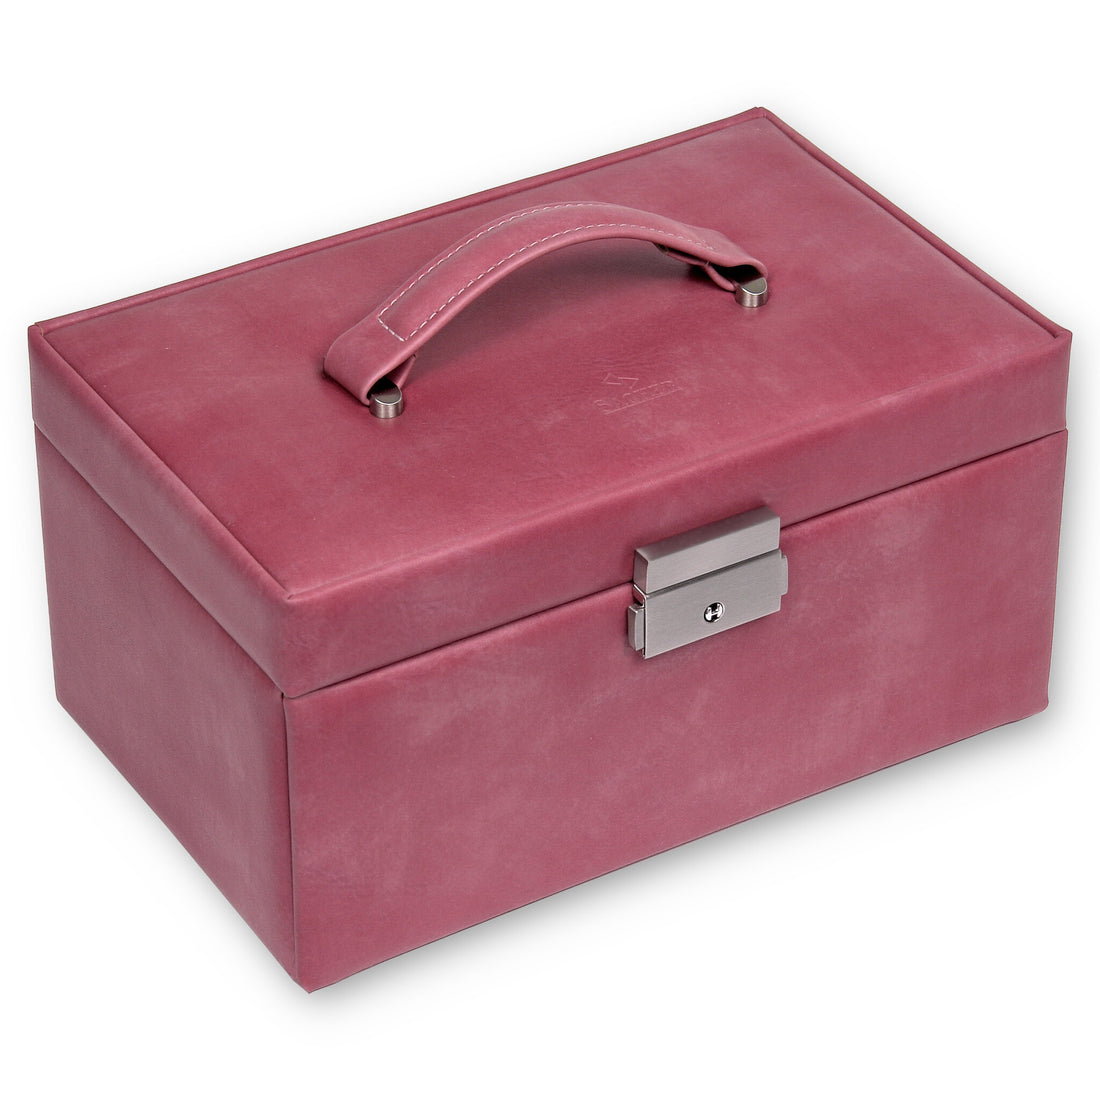 jewellery case Elly pastello / old rose